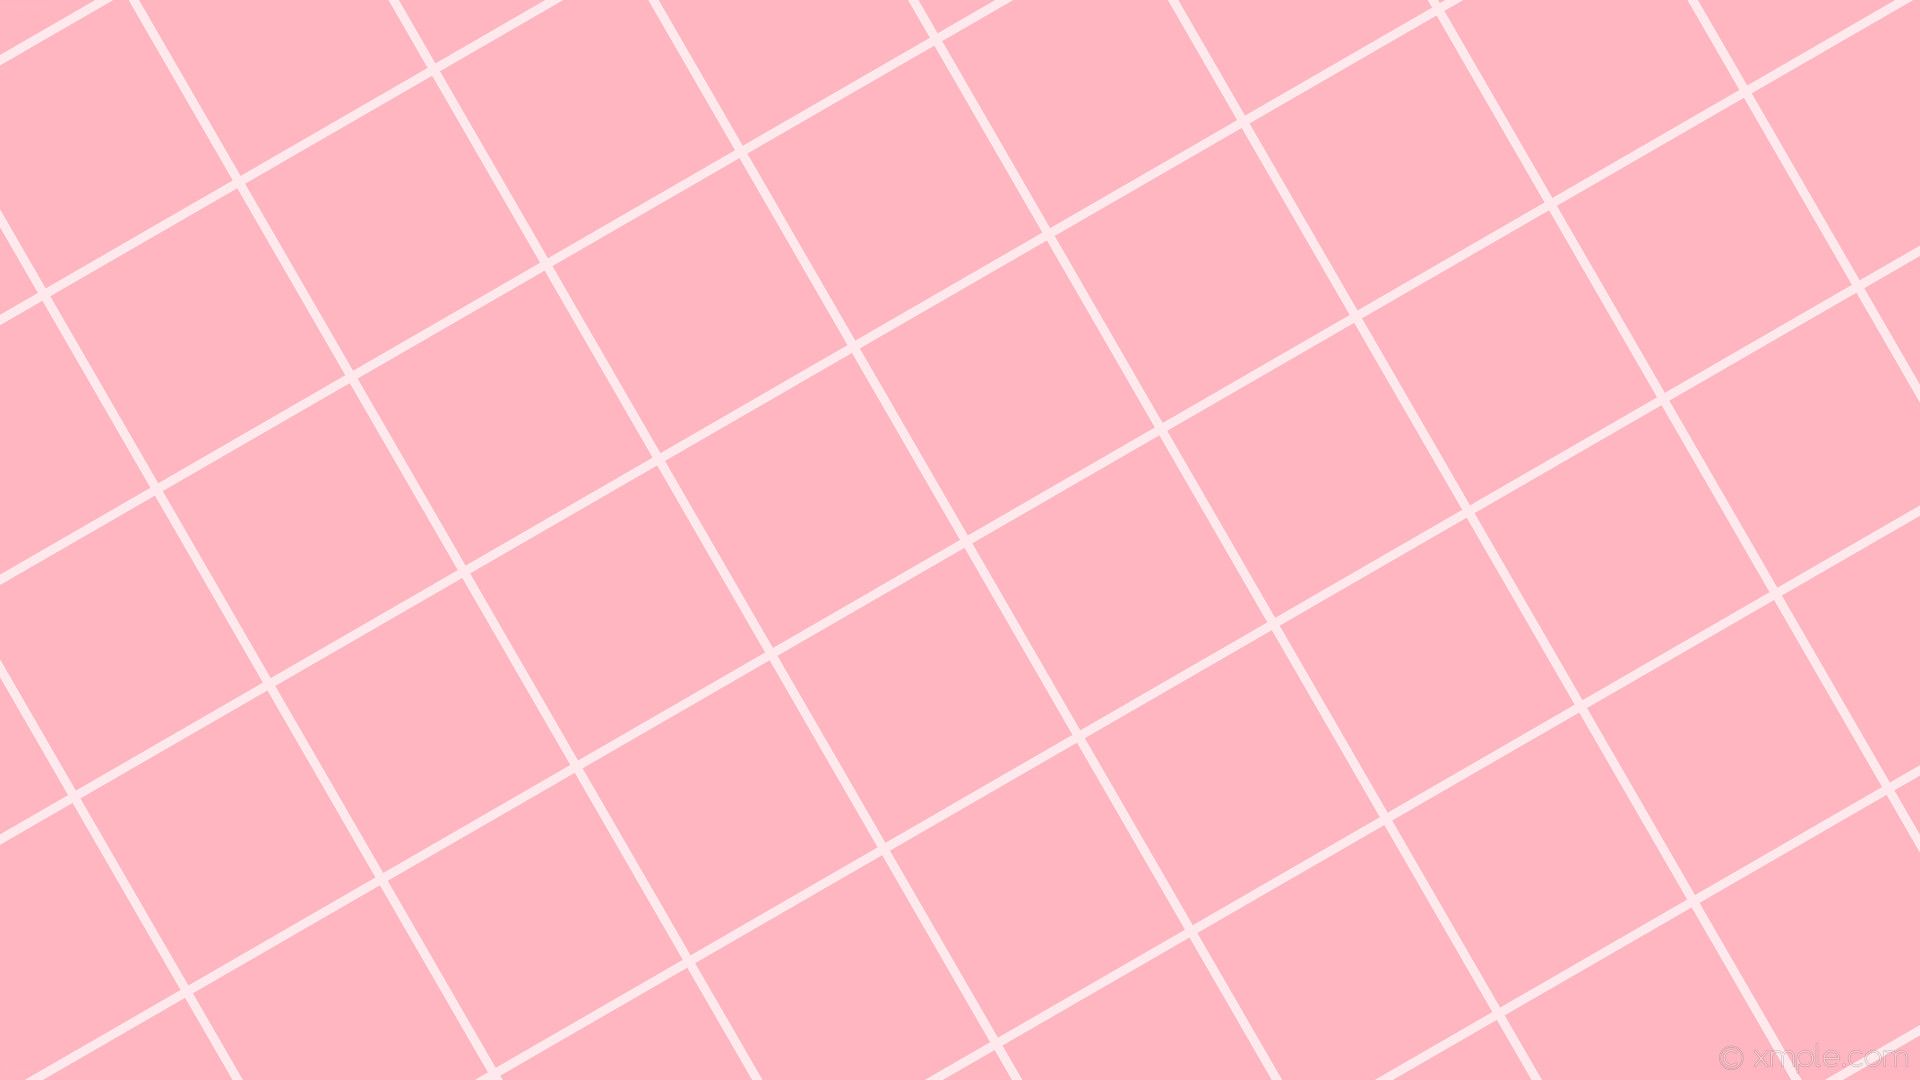 Square wide grid pattern art pink color in dotted line Wide grid design  for print Seamless pattern of via acting of the cats Graphic design for  decorating wallpaper fabric and etc 8884359